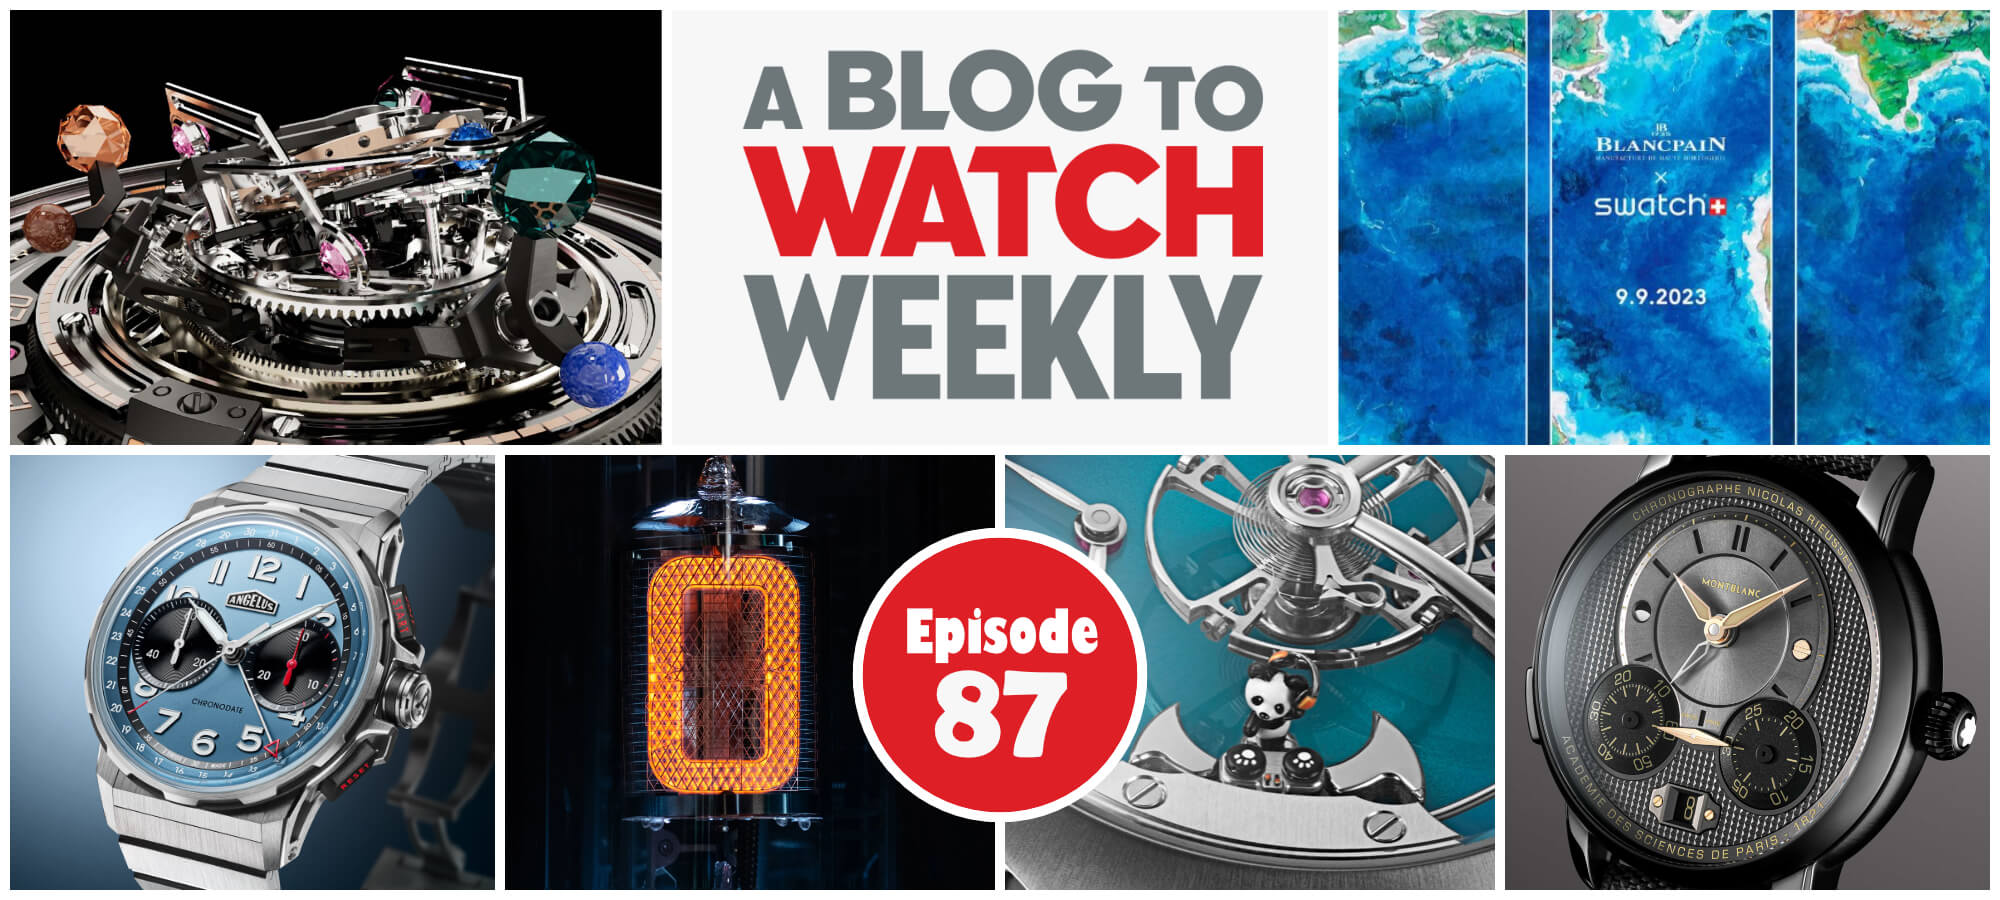 aBlogtoWatch Weekly Episode 87